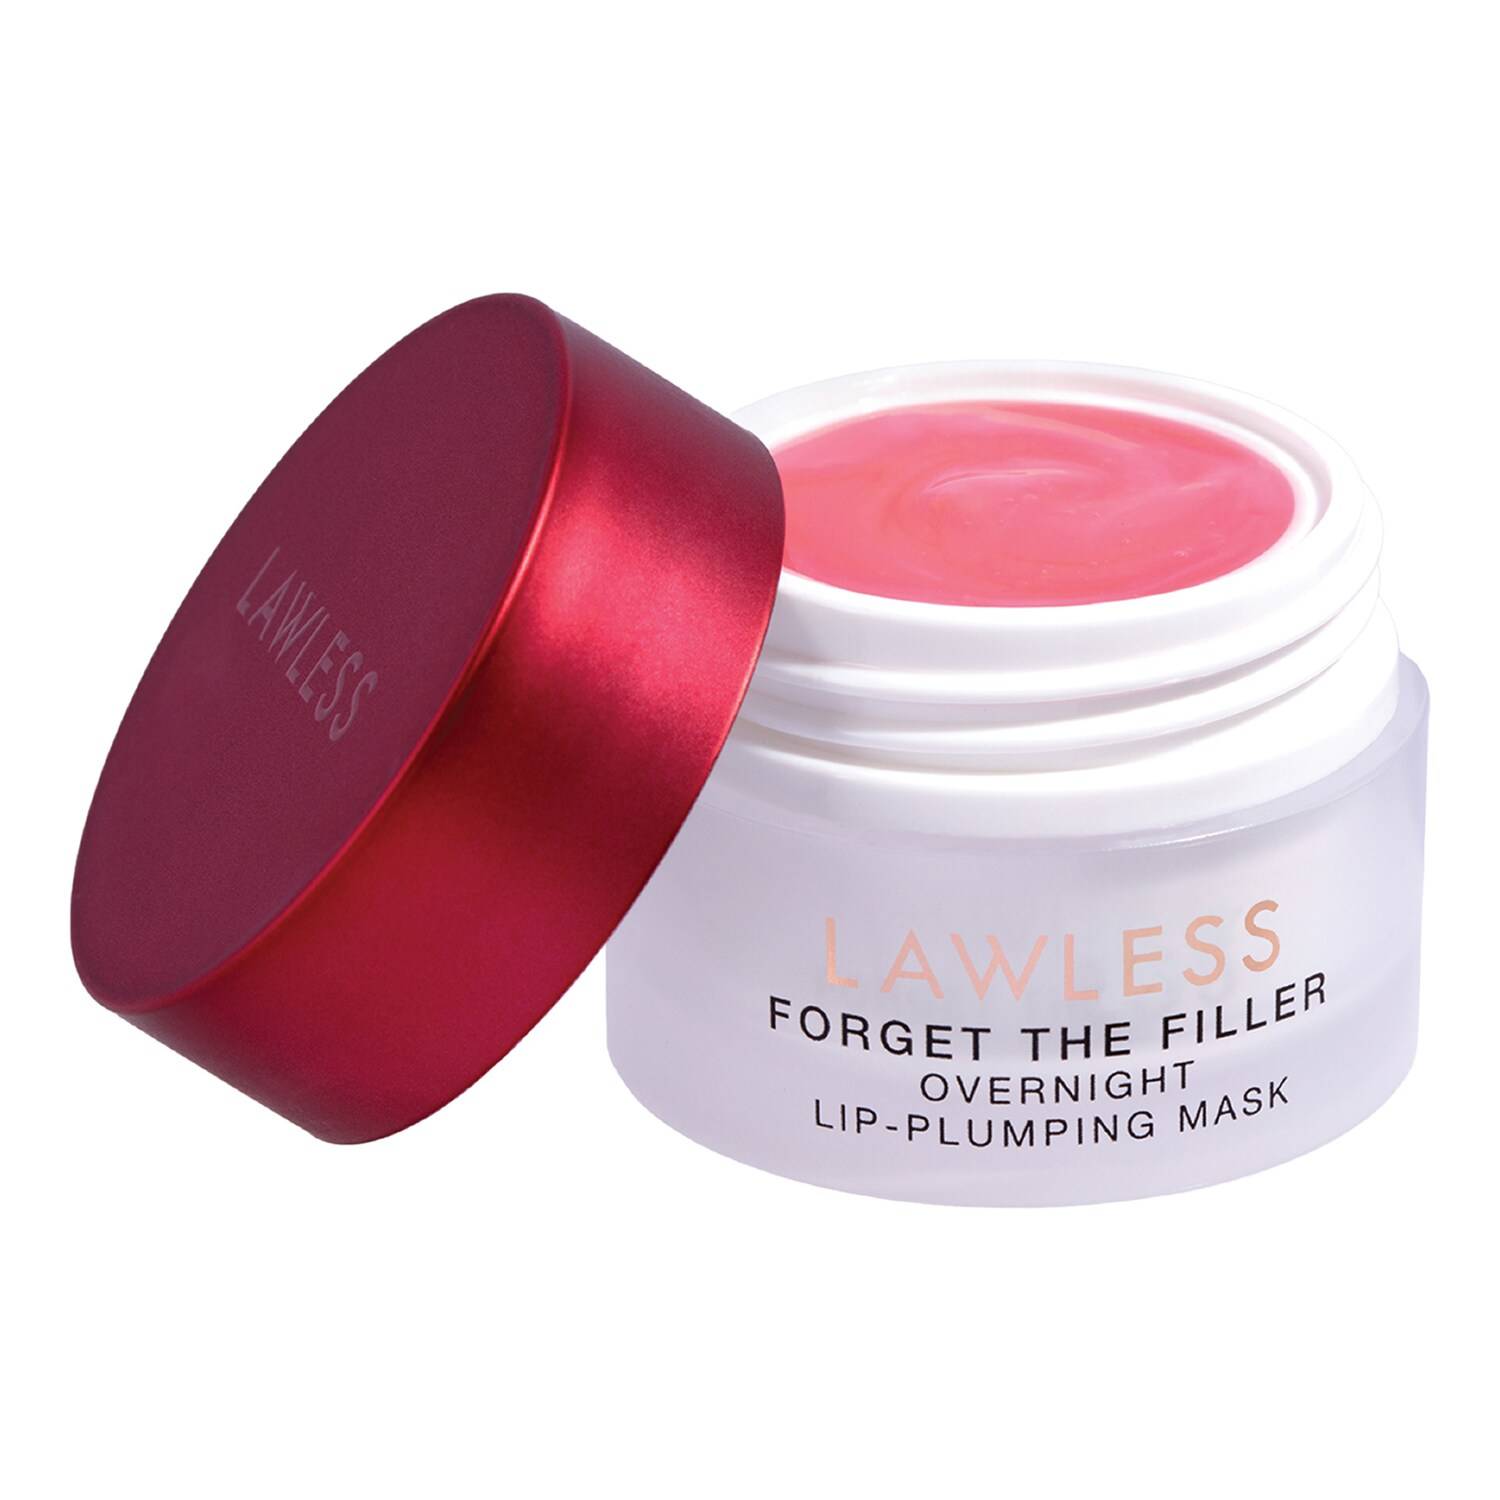 Lawless Beauty Forget The Filler Overnight Lip Plumping Mask 8Ml Cherry Vanilla